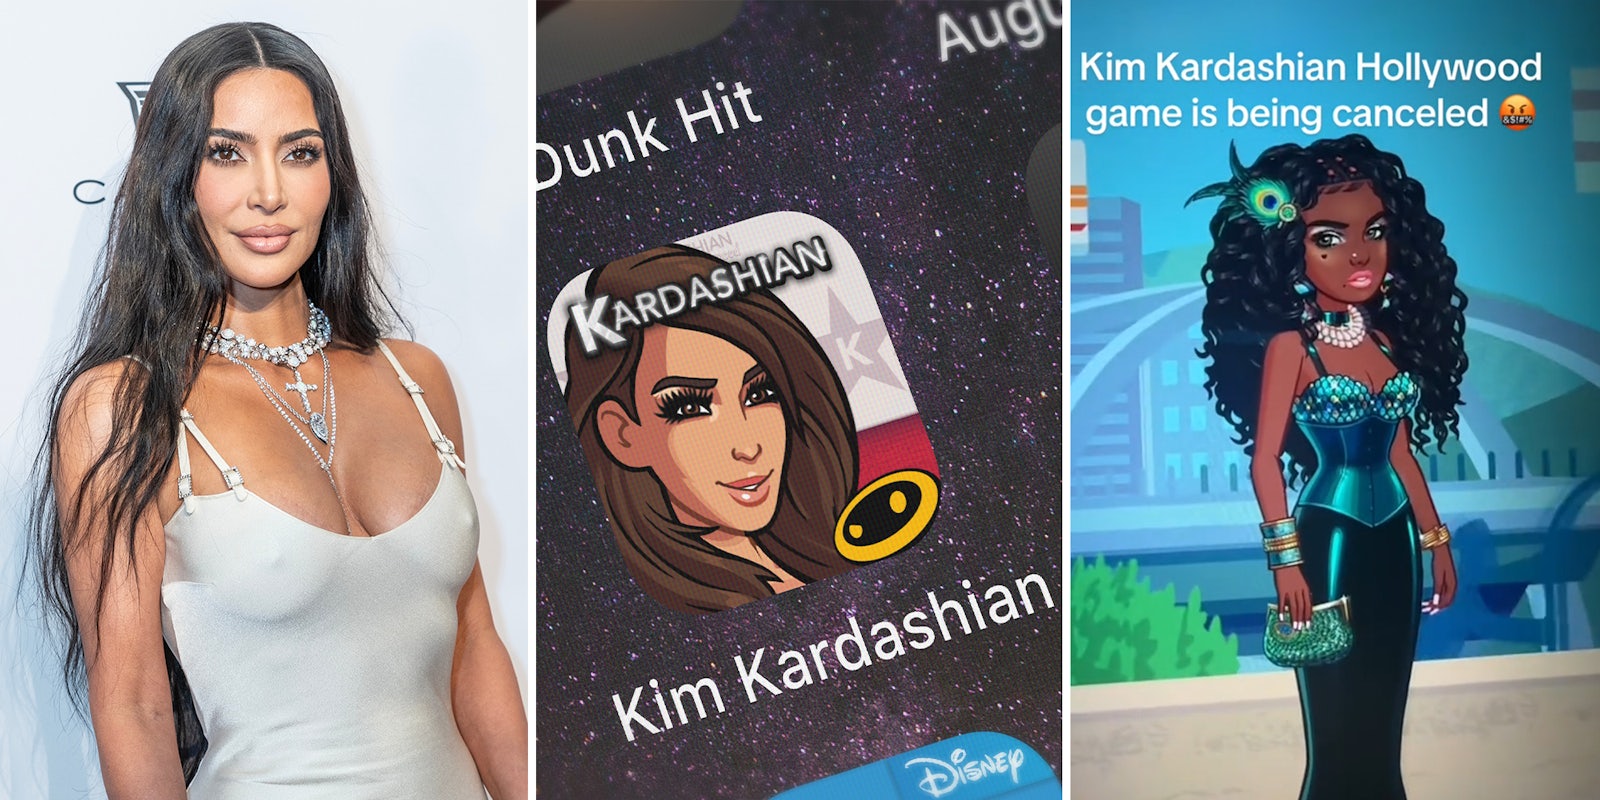 Kim Kardashian Hollywood player invested 10 years in the game. Now they’re shutting it down